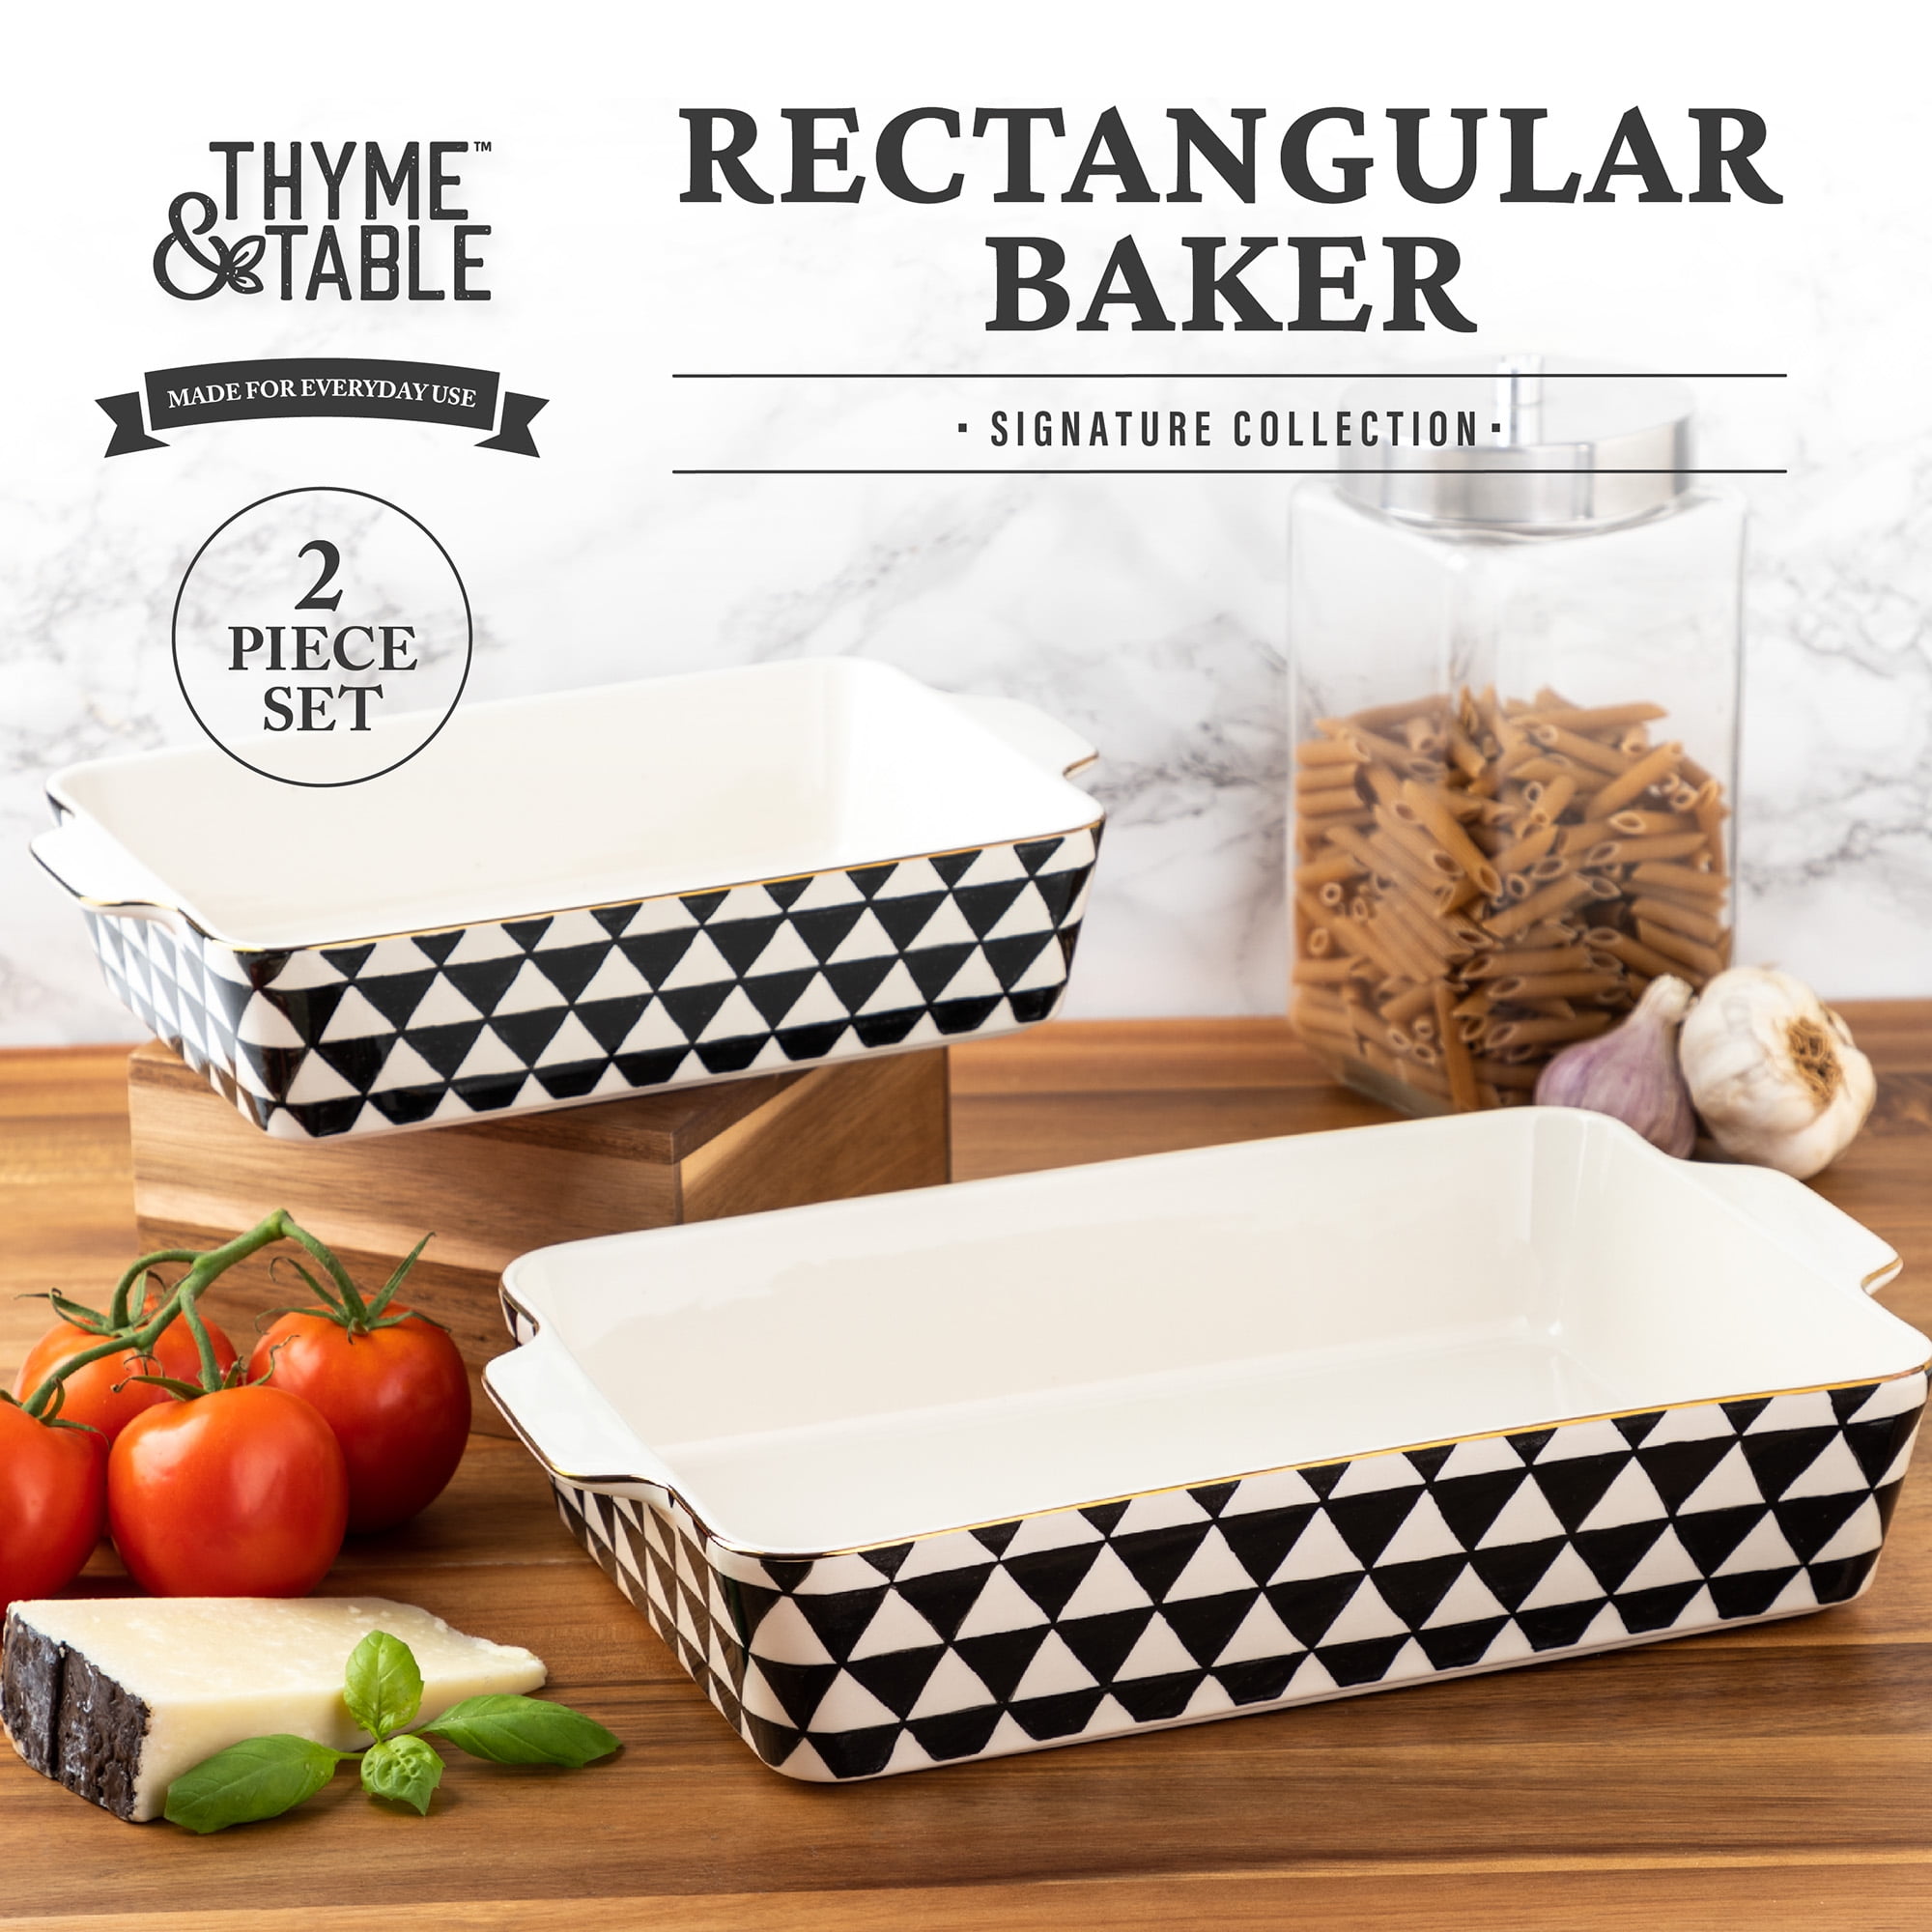 La Rochelle 7 Pc. Ceramic Bakeware Set With Square and Round Pans, Rustic  Farmhouse Dishes for Baking, Cooking, Lasagna, and Pastries, 